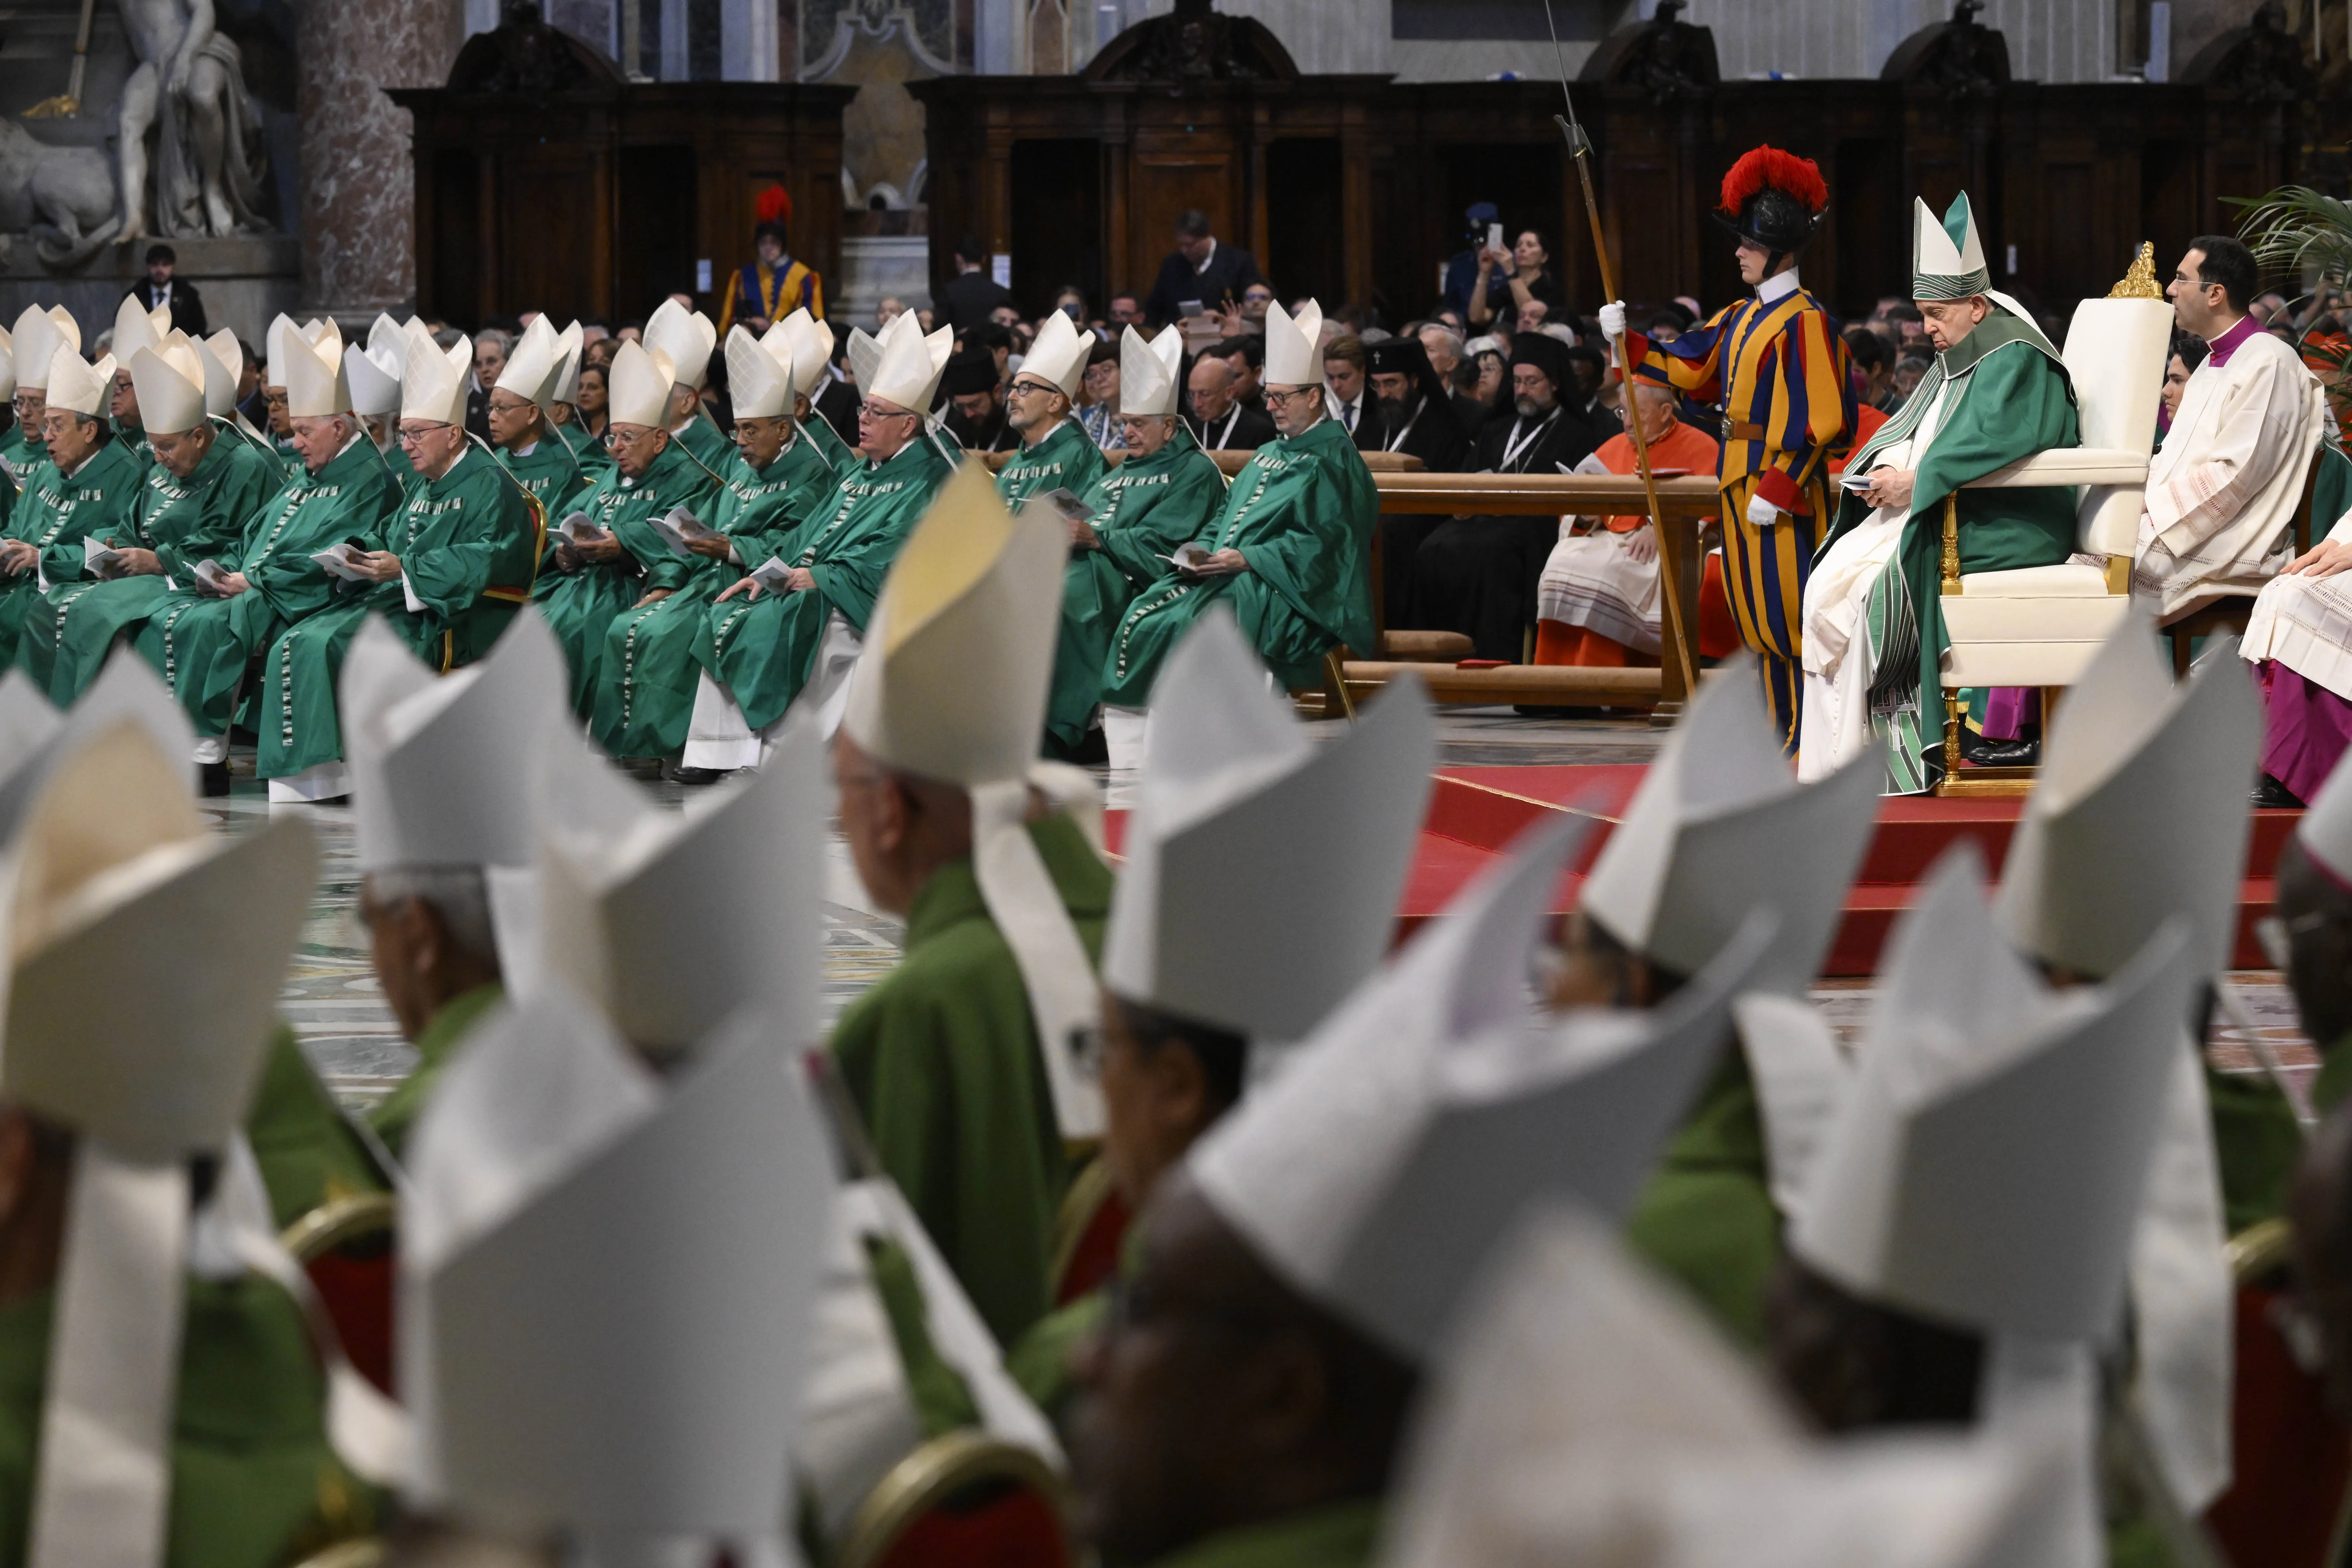 Pope Francis at the Synod on Synodality’s closing Mass in St. Peter’s Basilica on Oct. 29, 2023.?w=200&h=150